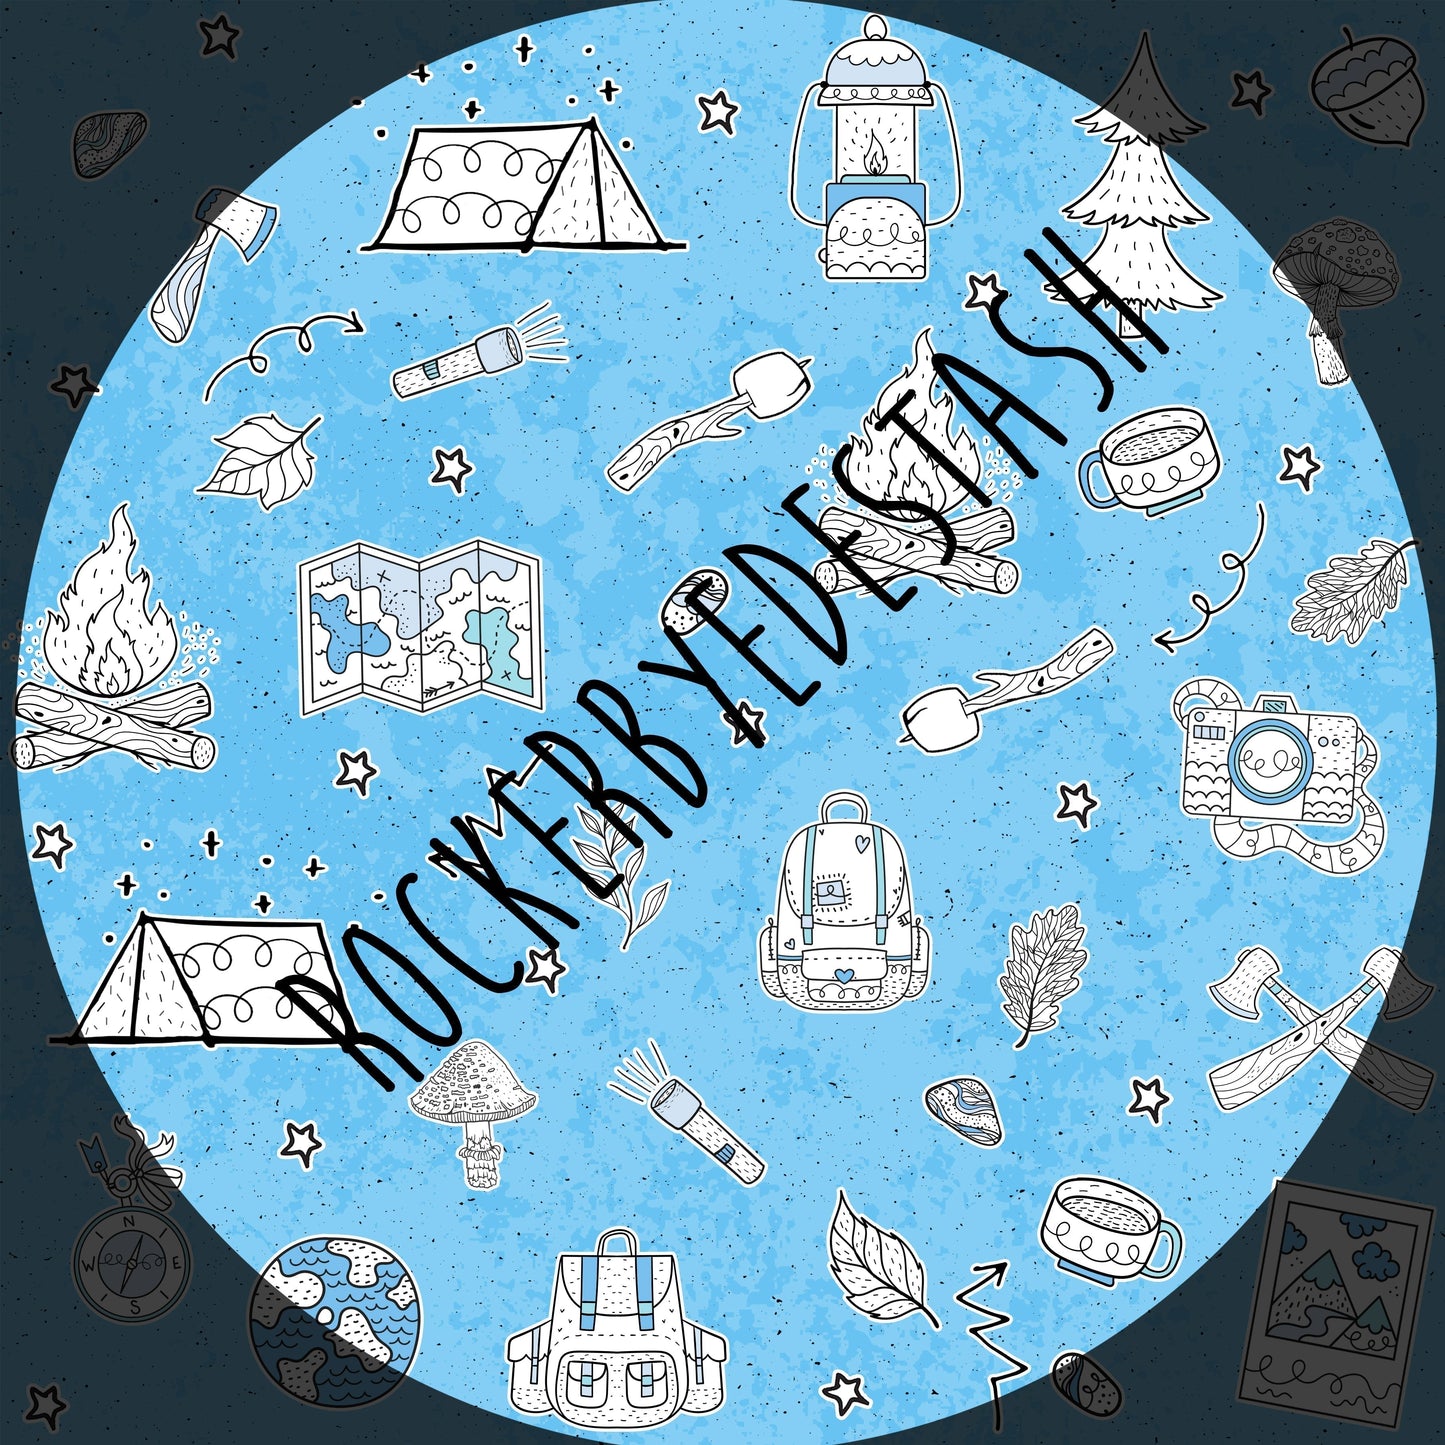 Vinyl - Round RR Fabric - Retail - Travel & Camping - all designs listed here